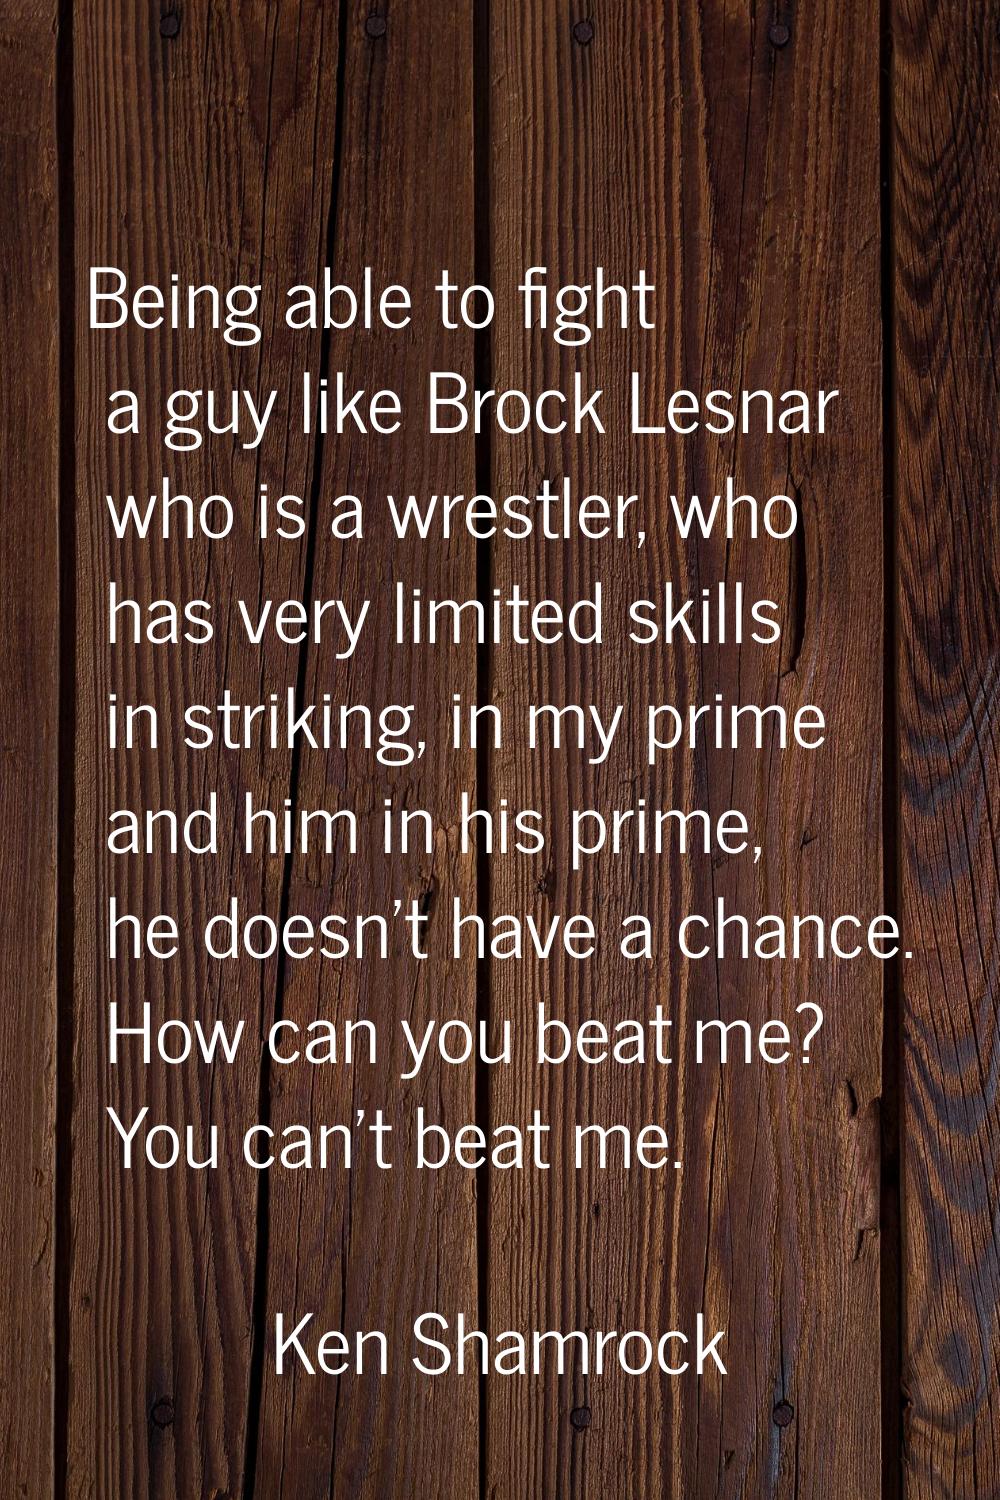 Being able to fight a guy like Brock Lesnar who is a wrestler, who has very limited skills in strik